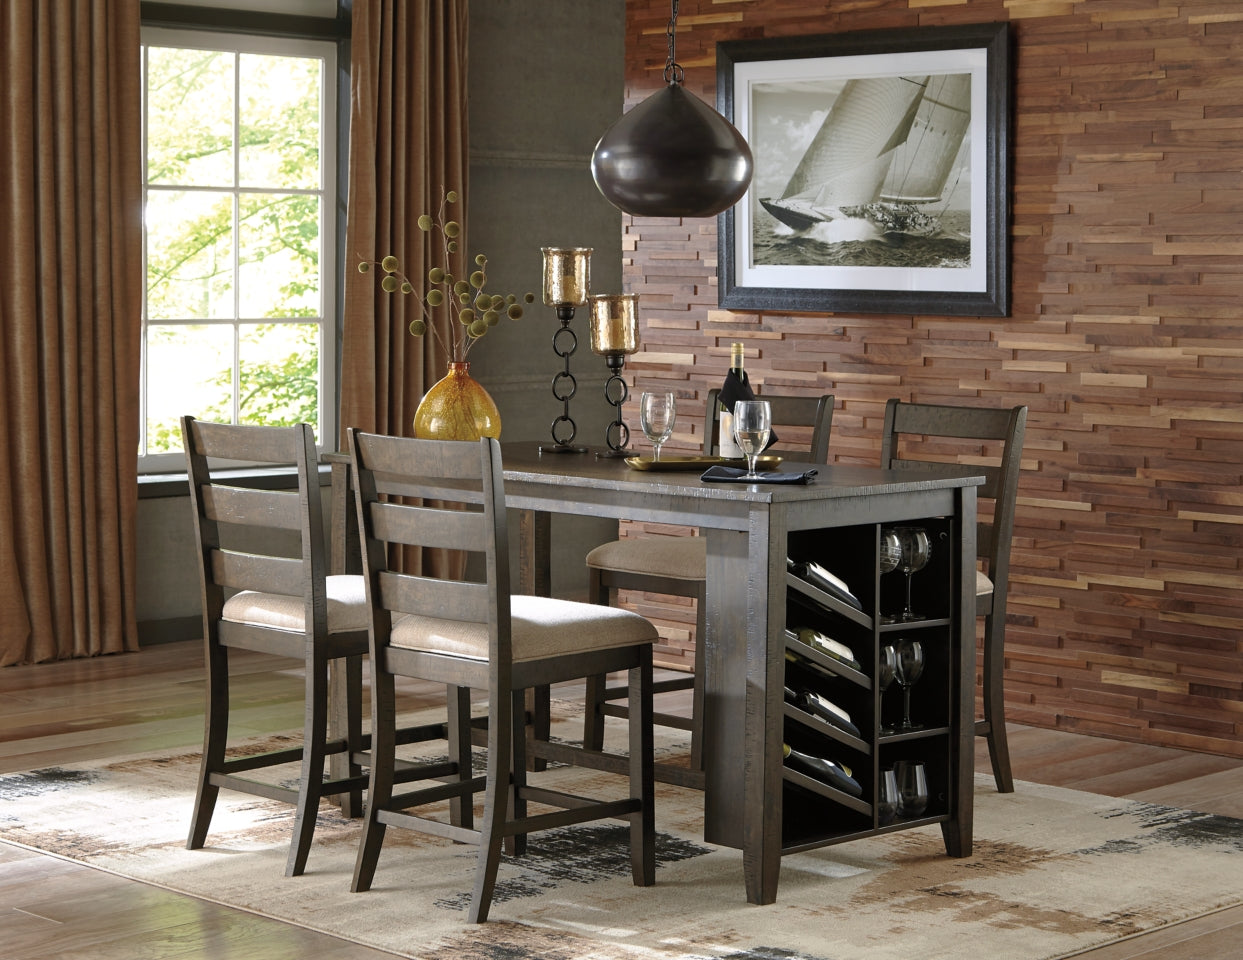 Rokane Counter Height Dining Table and 4 Barstools - PKG000111